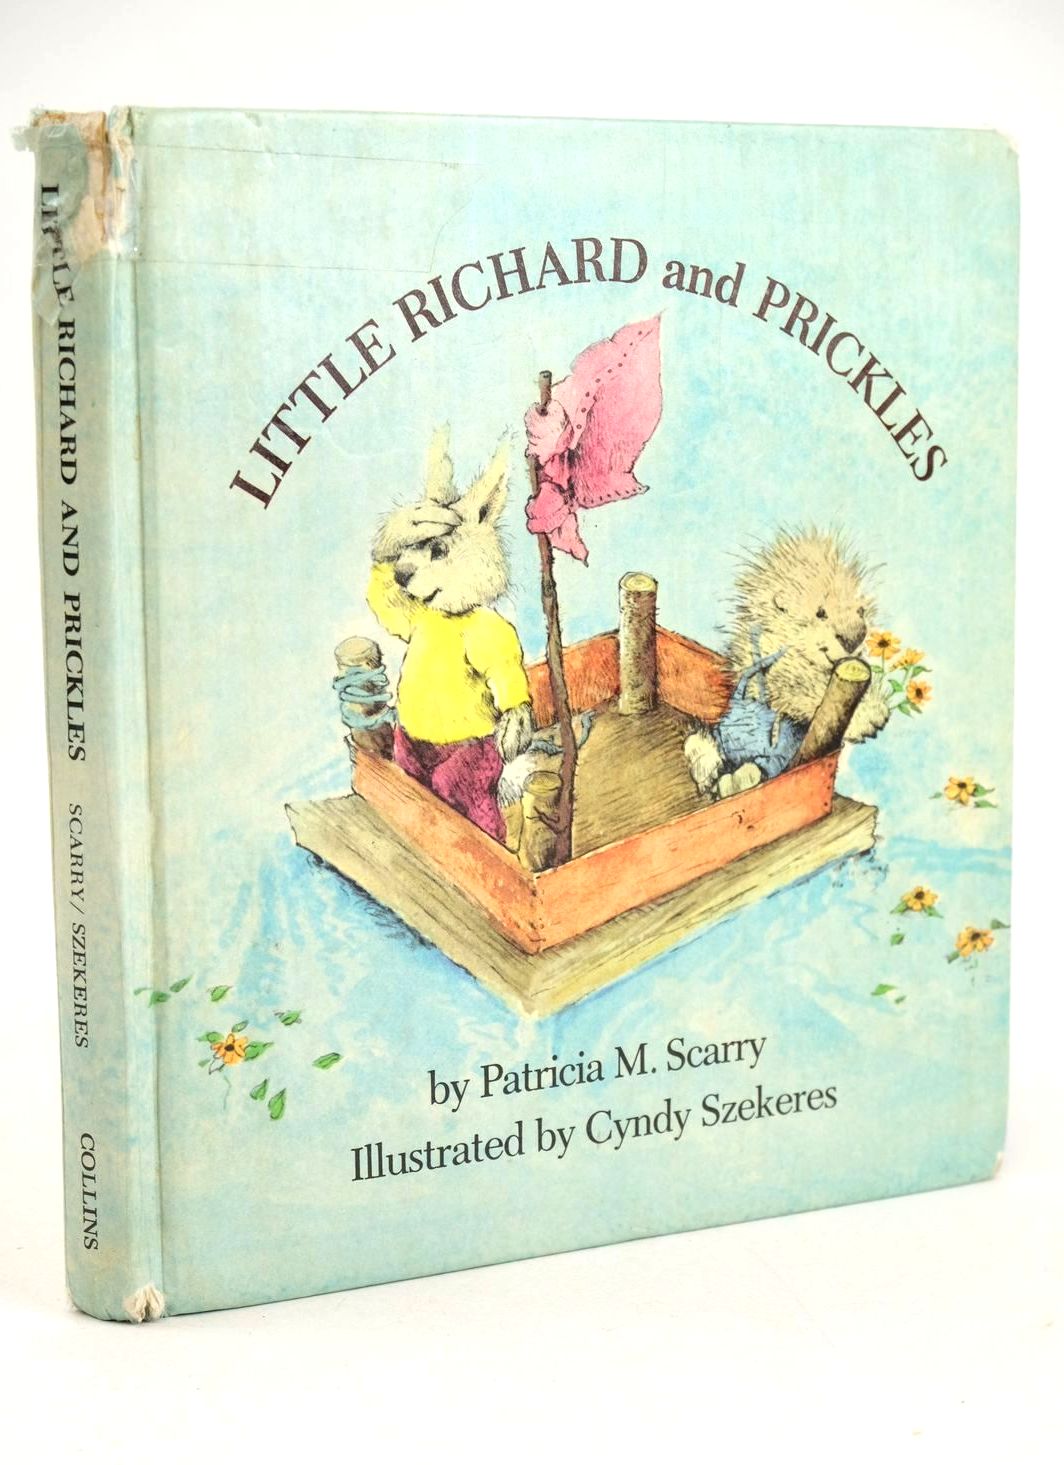 Photo of LITTLE RICHARD AND PRICKLES written by Scarry, Patricia M. illustrated by Szekeres, Cyndy published by Collins (STOCK CODE: 1327744)  for sale by Stella & Rose's Books